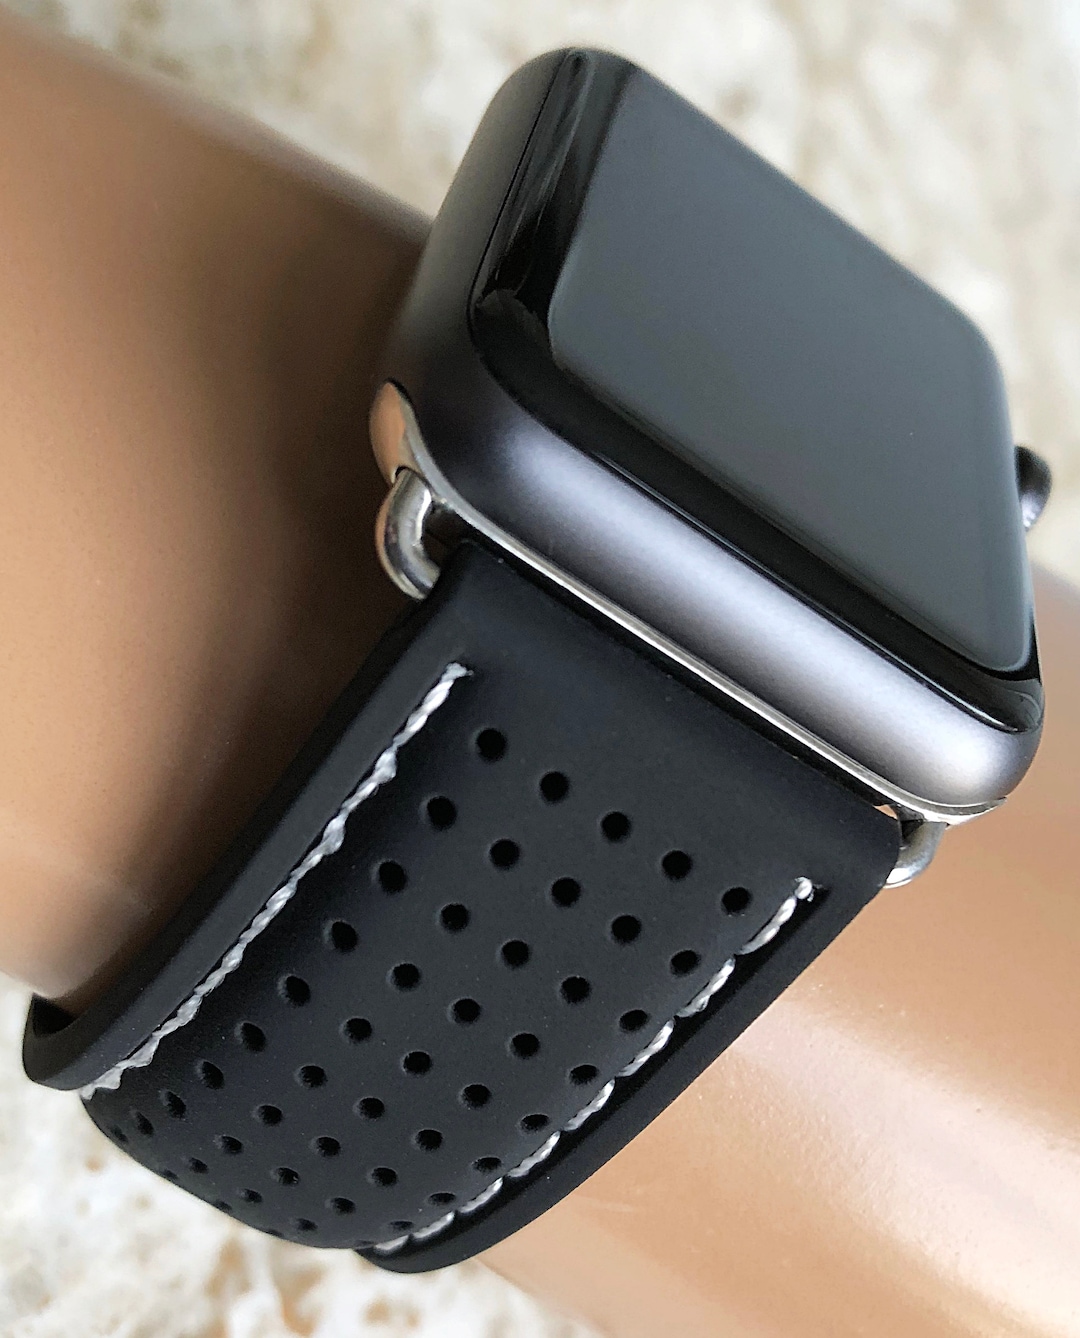  Luxury Band Compatible with Apple Watch SE Series 7/6 38mm 40mm  41mm 42mm 44mm 45mm, Genuine Leather Vintage Replacement Strap Classic Bands  Buckle Compatible with iWatch SE 7/6/5/4/3/2/(Black42/44/45) : Cell Phones